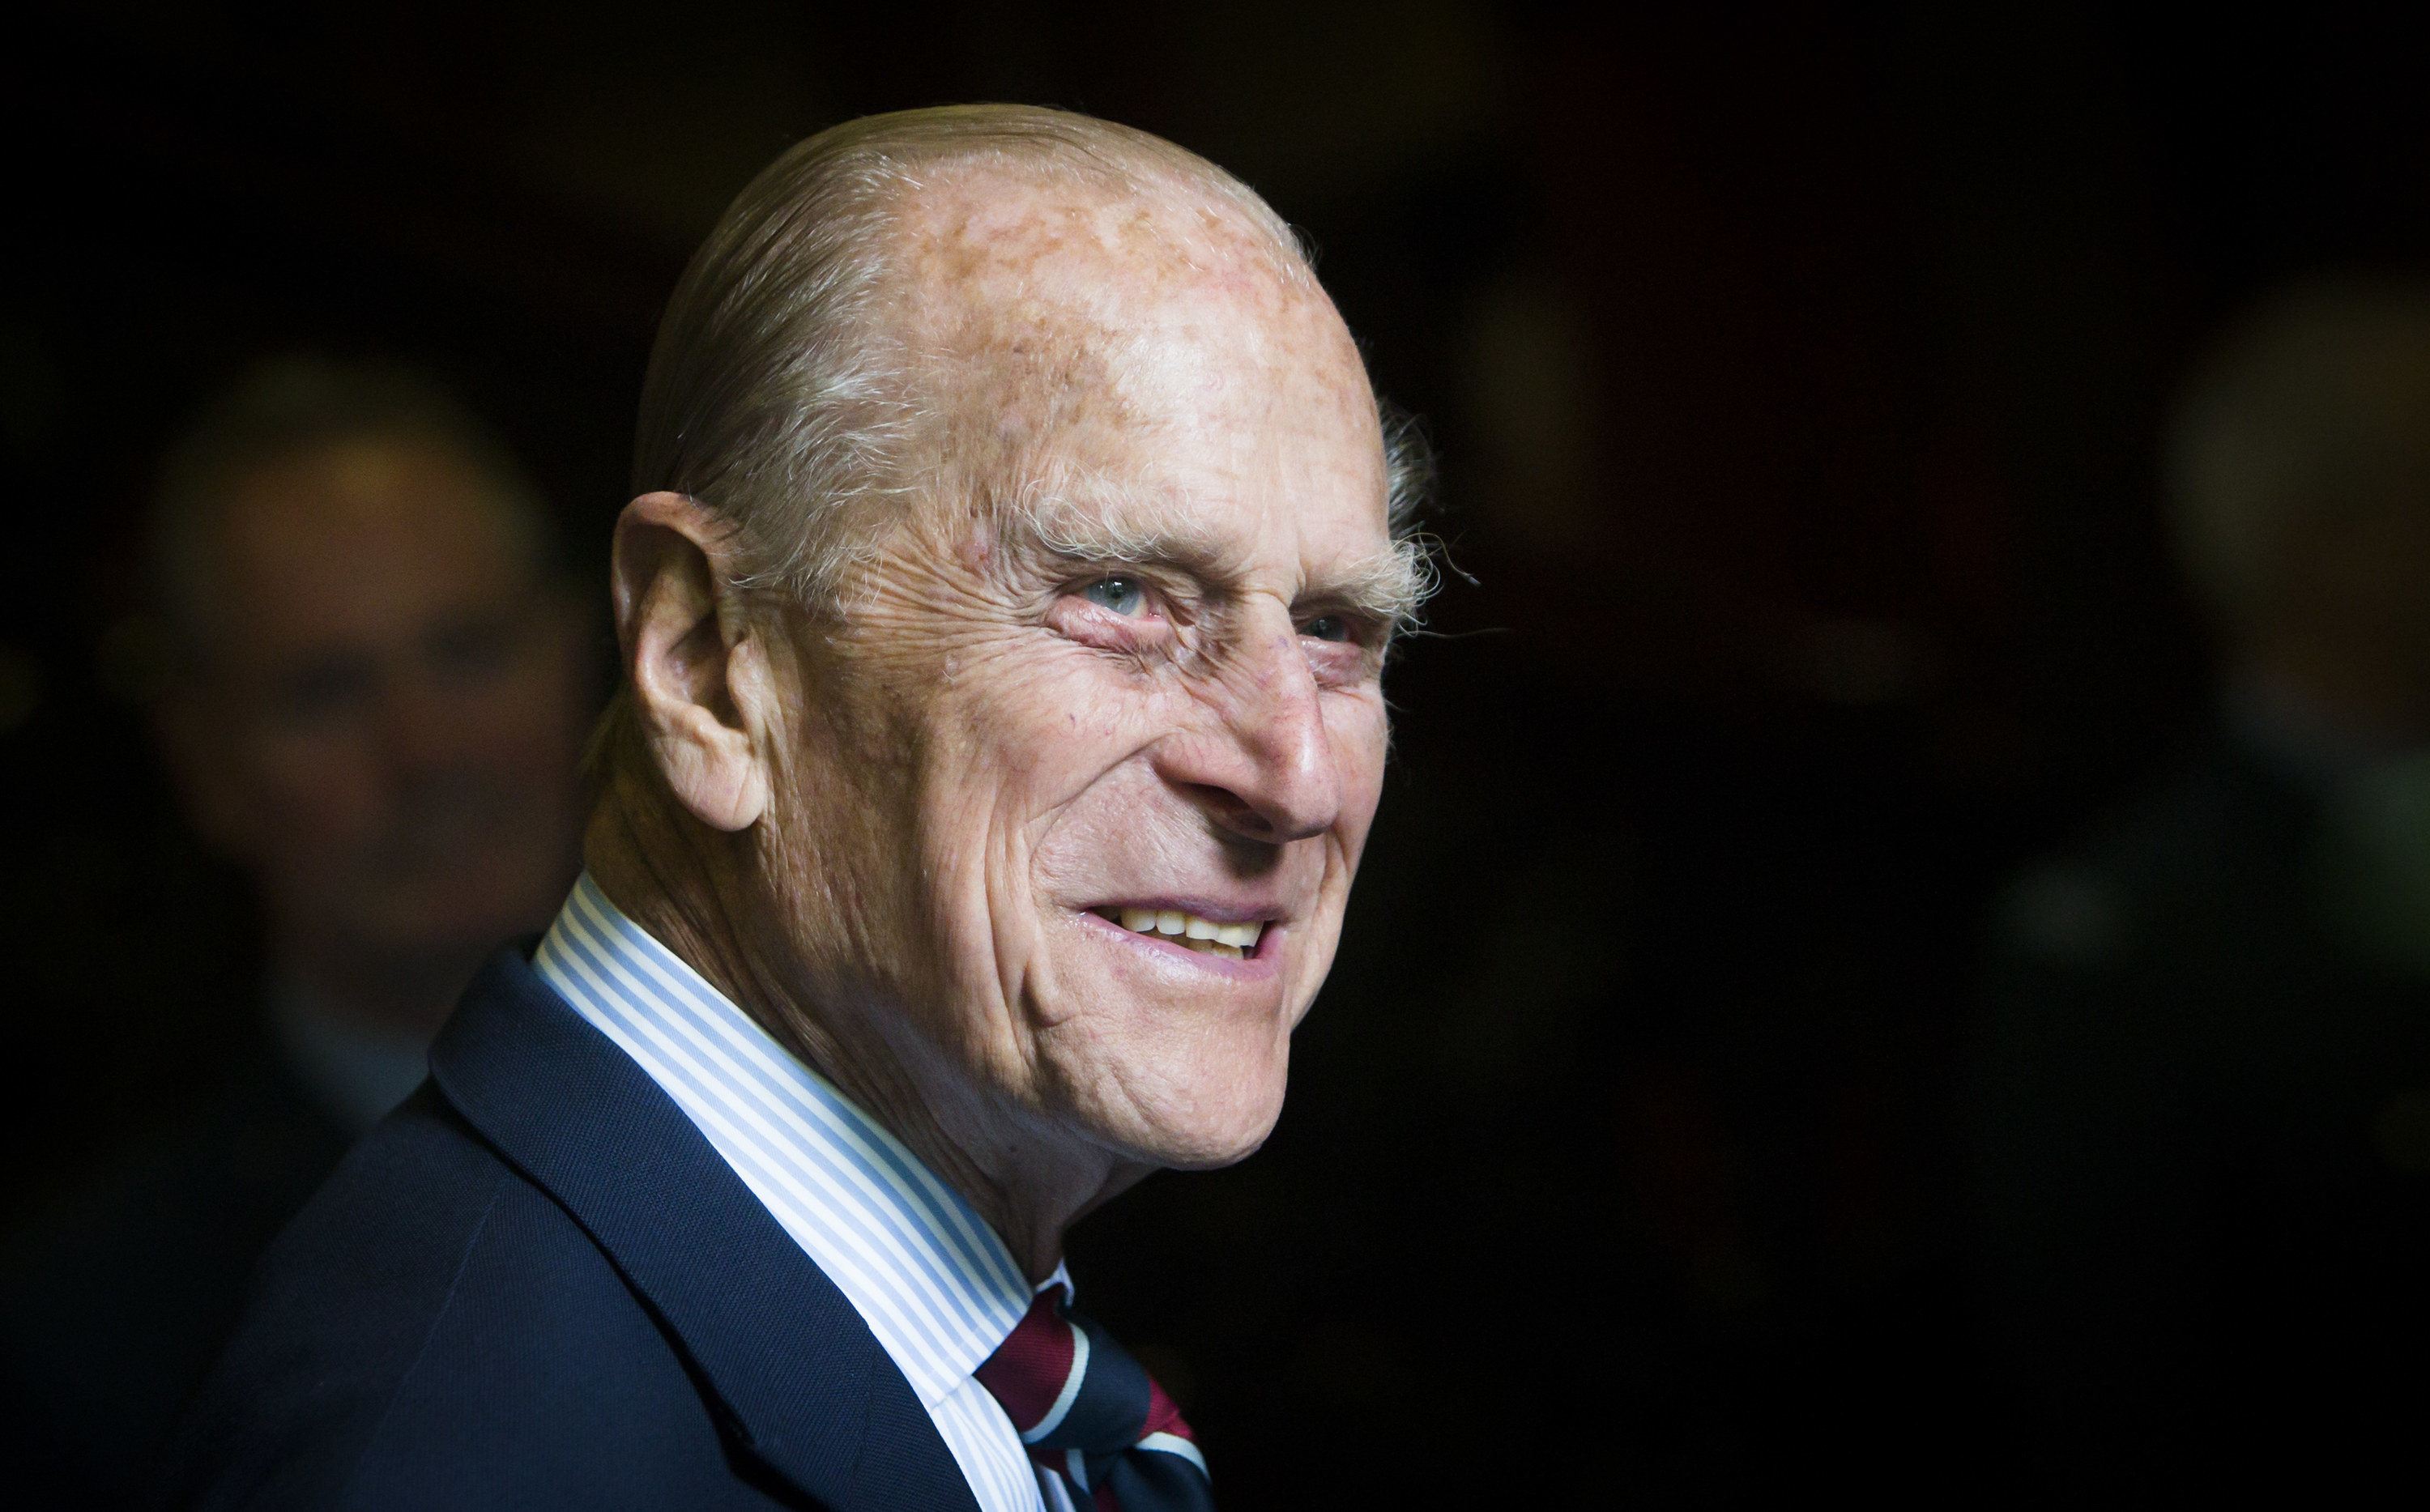 Prince Philip smiling in a suit and tie